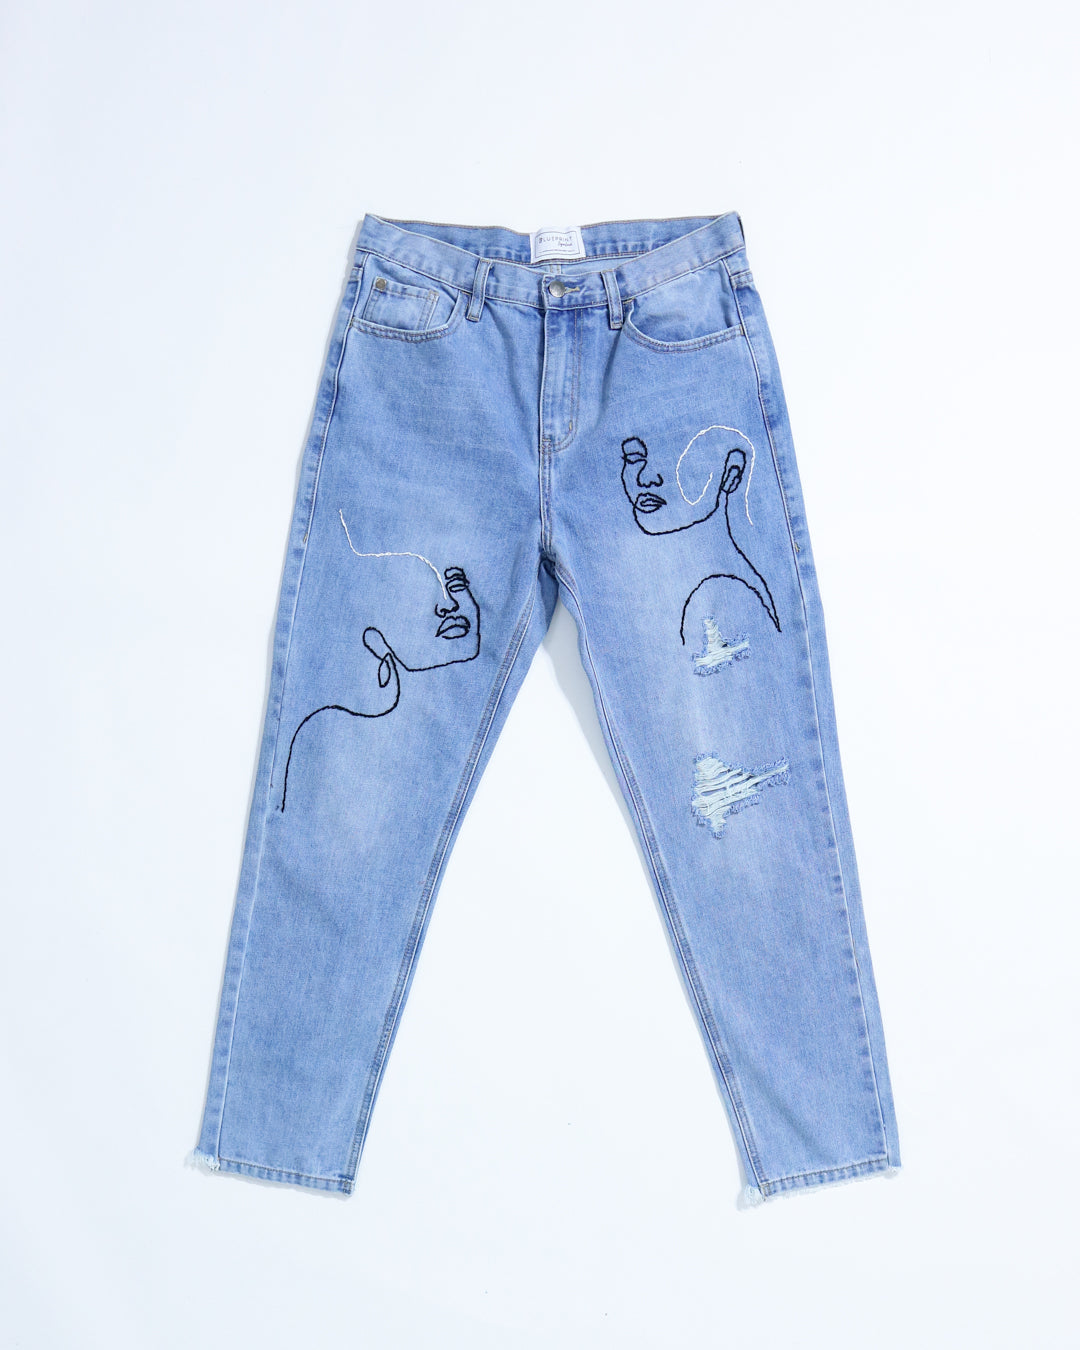 Embroidery Jeans (Order Your Size)